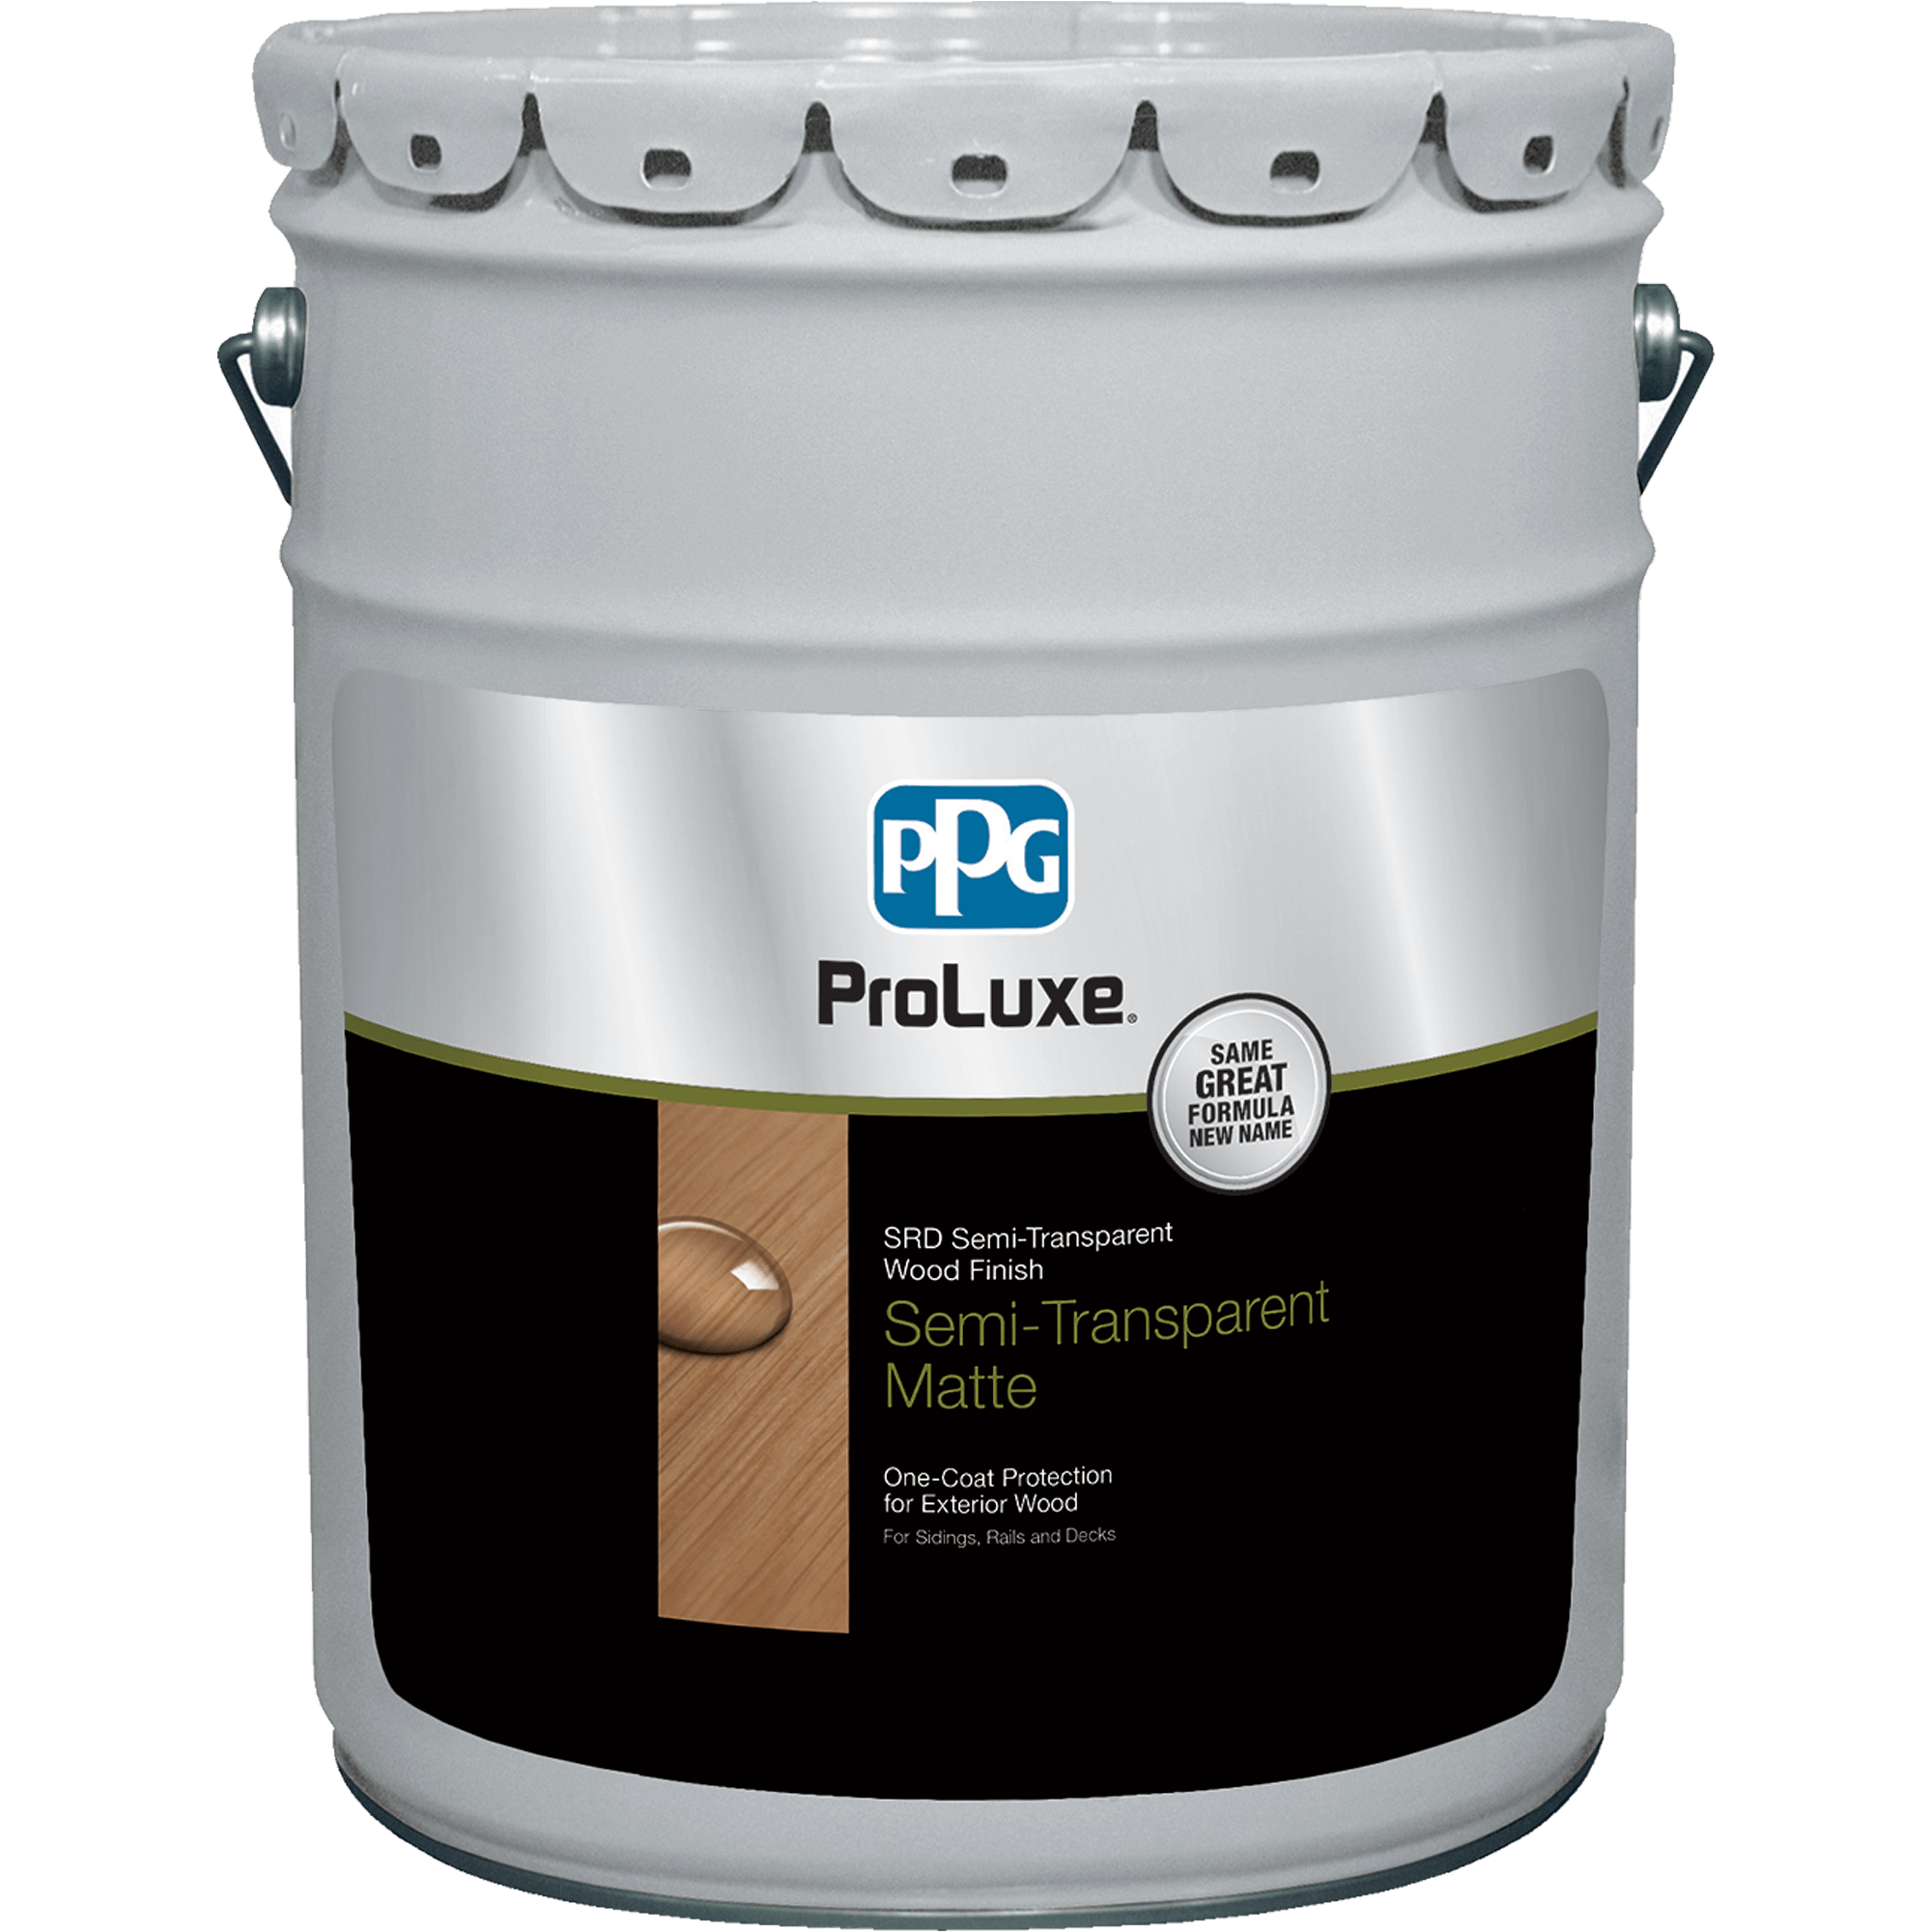 PROLUXE SRD Semi-Transparent Wood Finish - Professional Quality Paint  Products - PPG